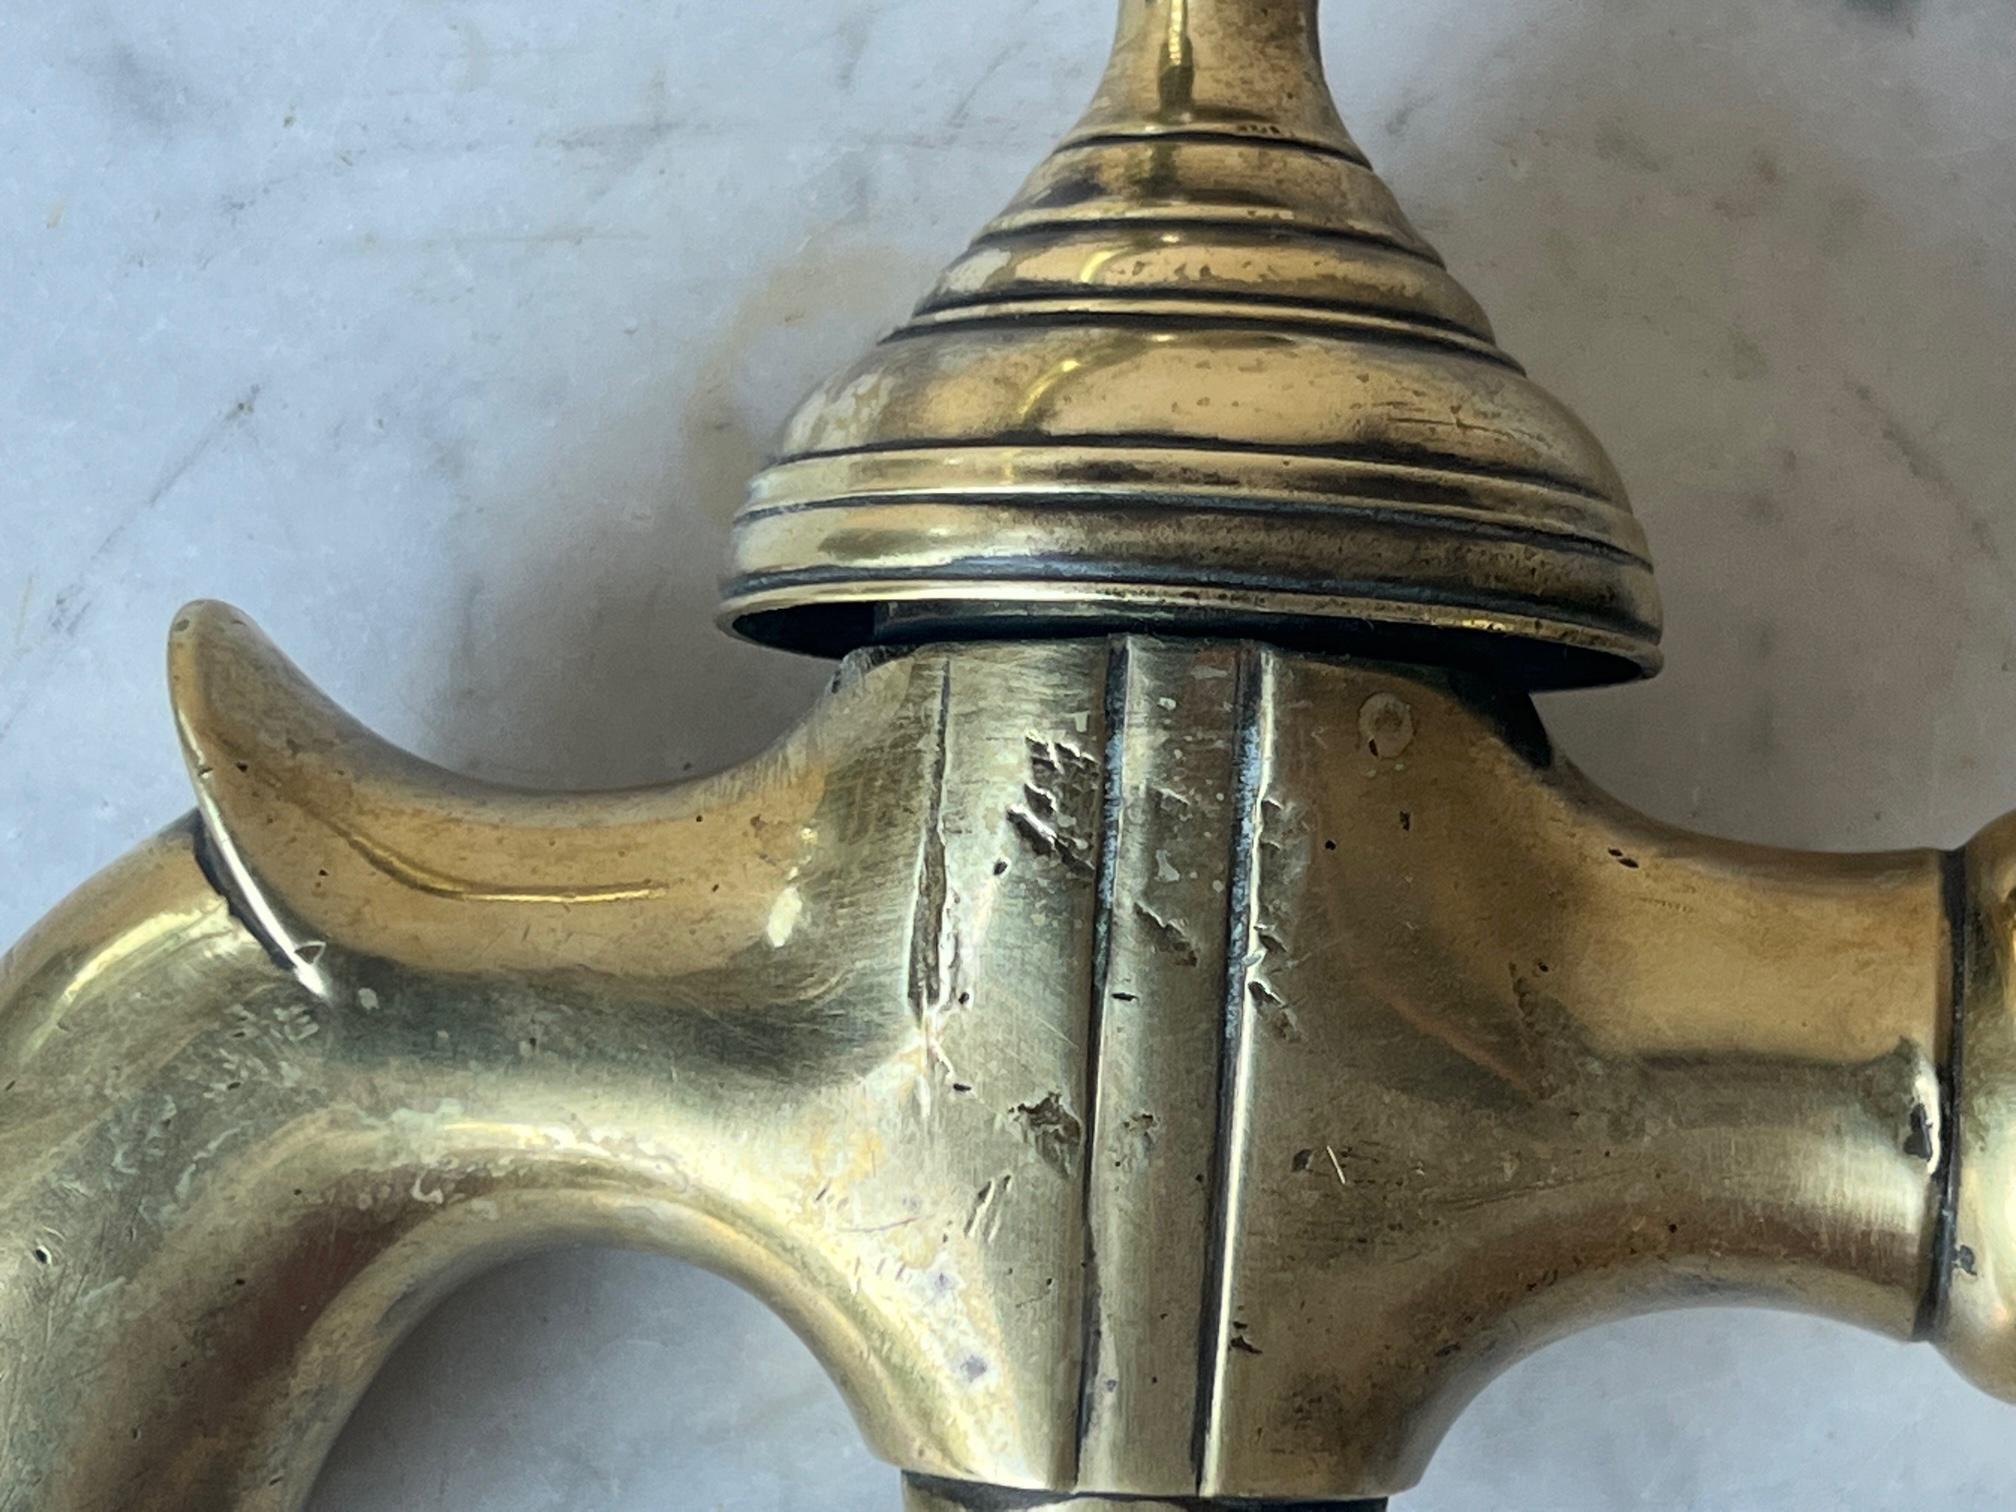 Antique brass faucet made in France around the 1920's to 1930's . Could be configured to fit a modern pipe. The handle turns and the faucet is functional.